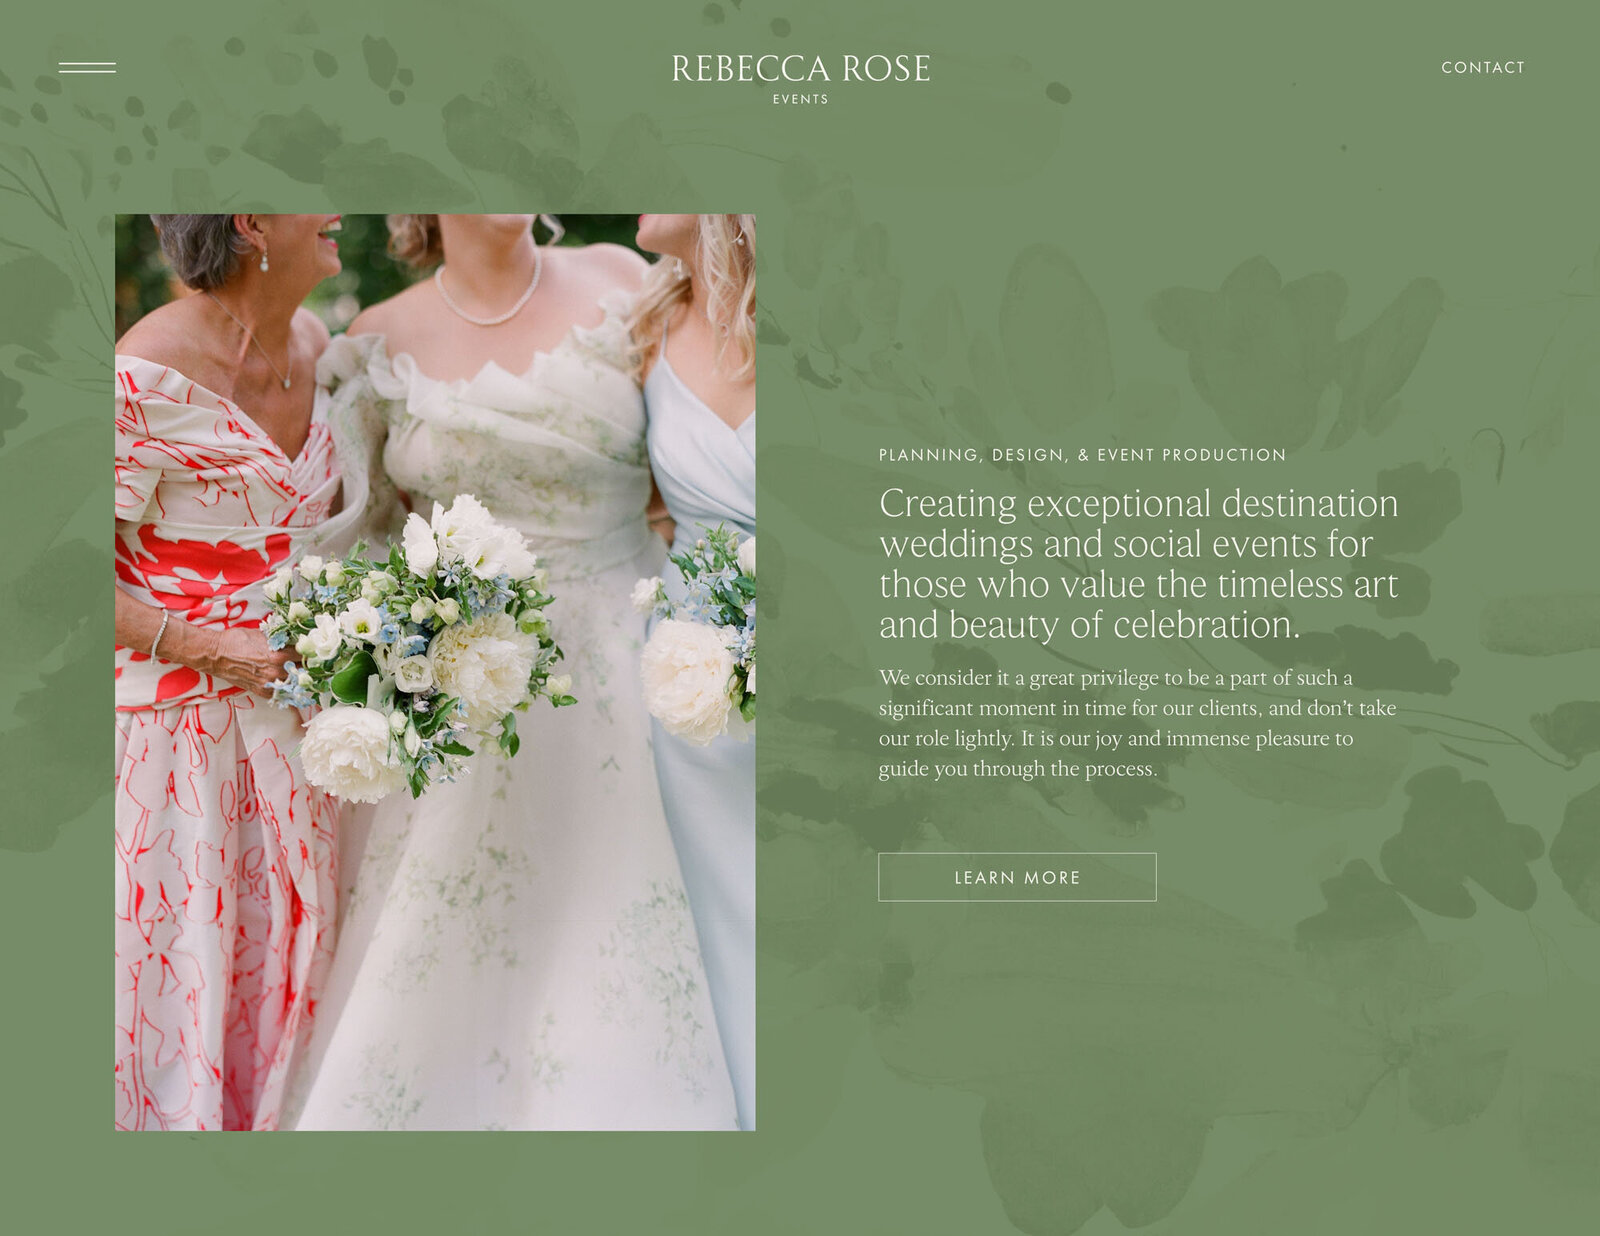 visual-identity-graphics-by letter-south-for-rebecca-rose-events-luxury-wedding-plannerRRE-Concept-web-mockup